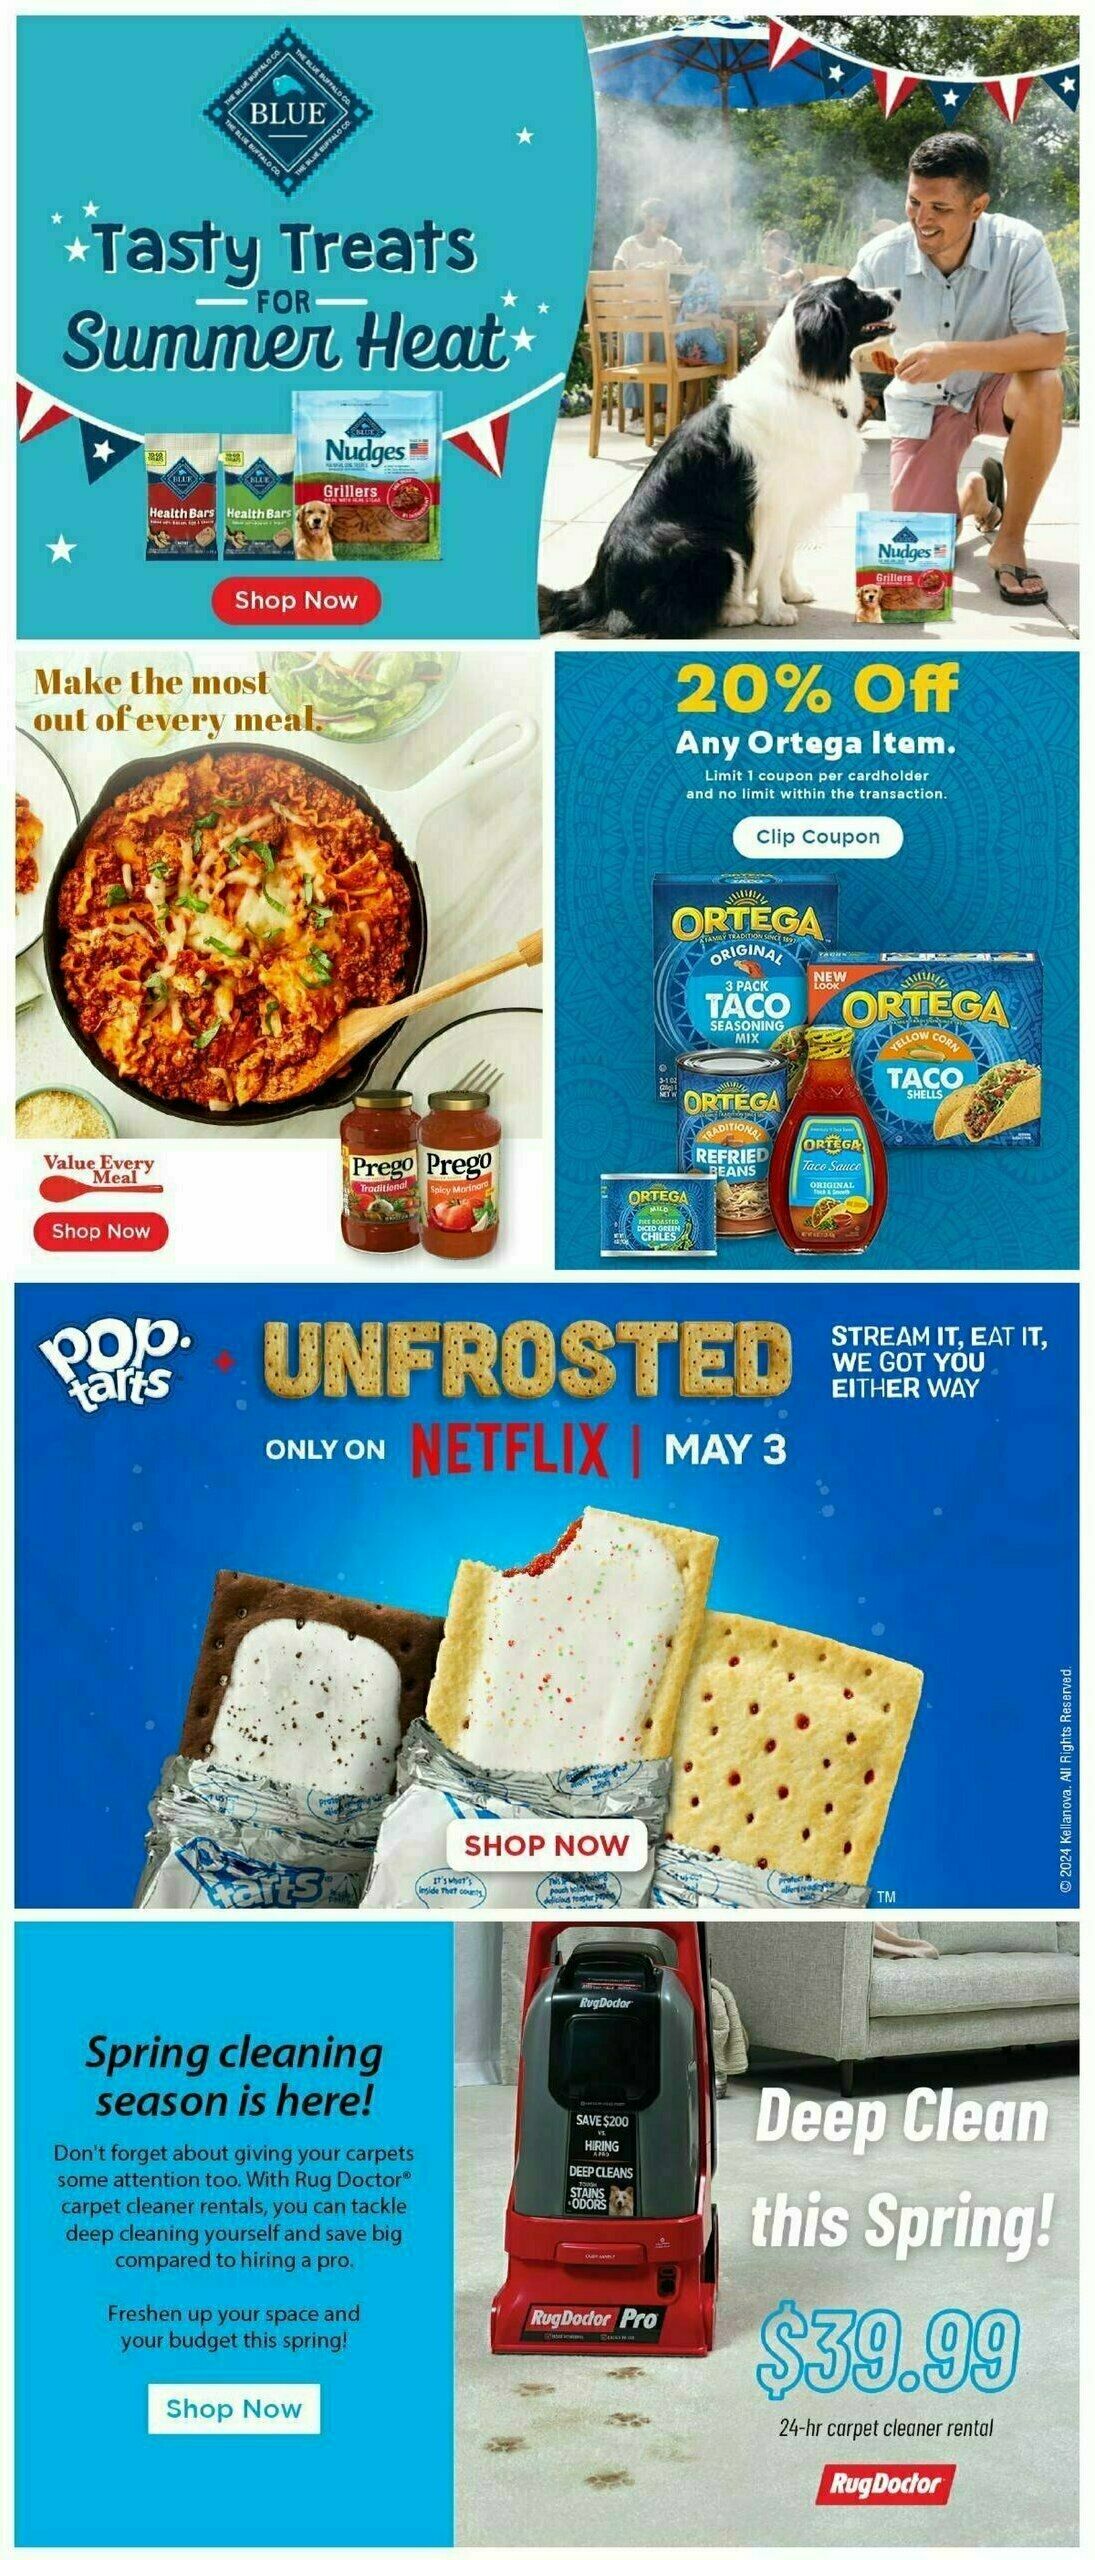 Cub Foods Weekly Ad from April 28